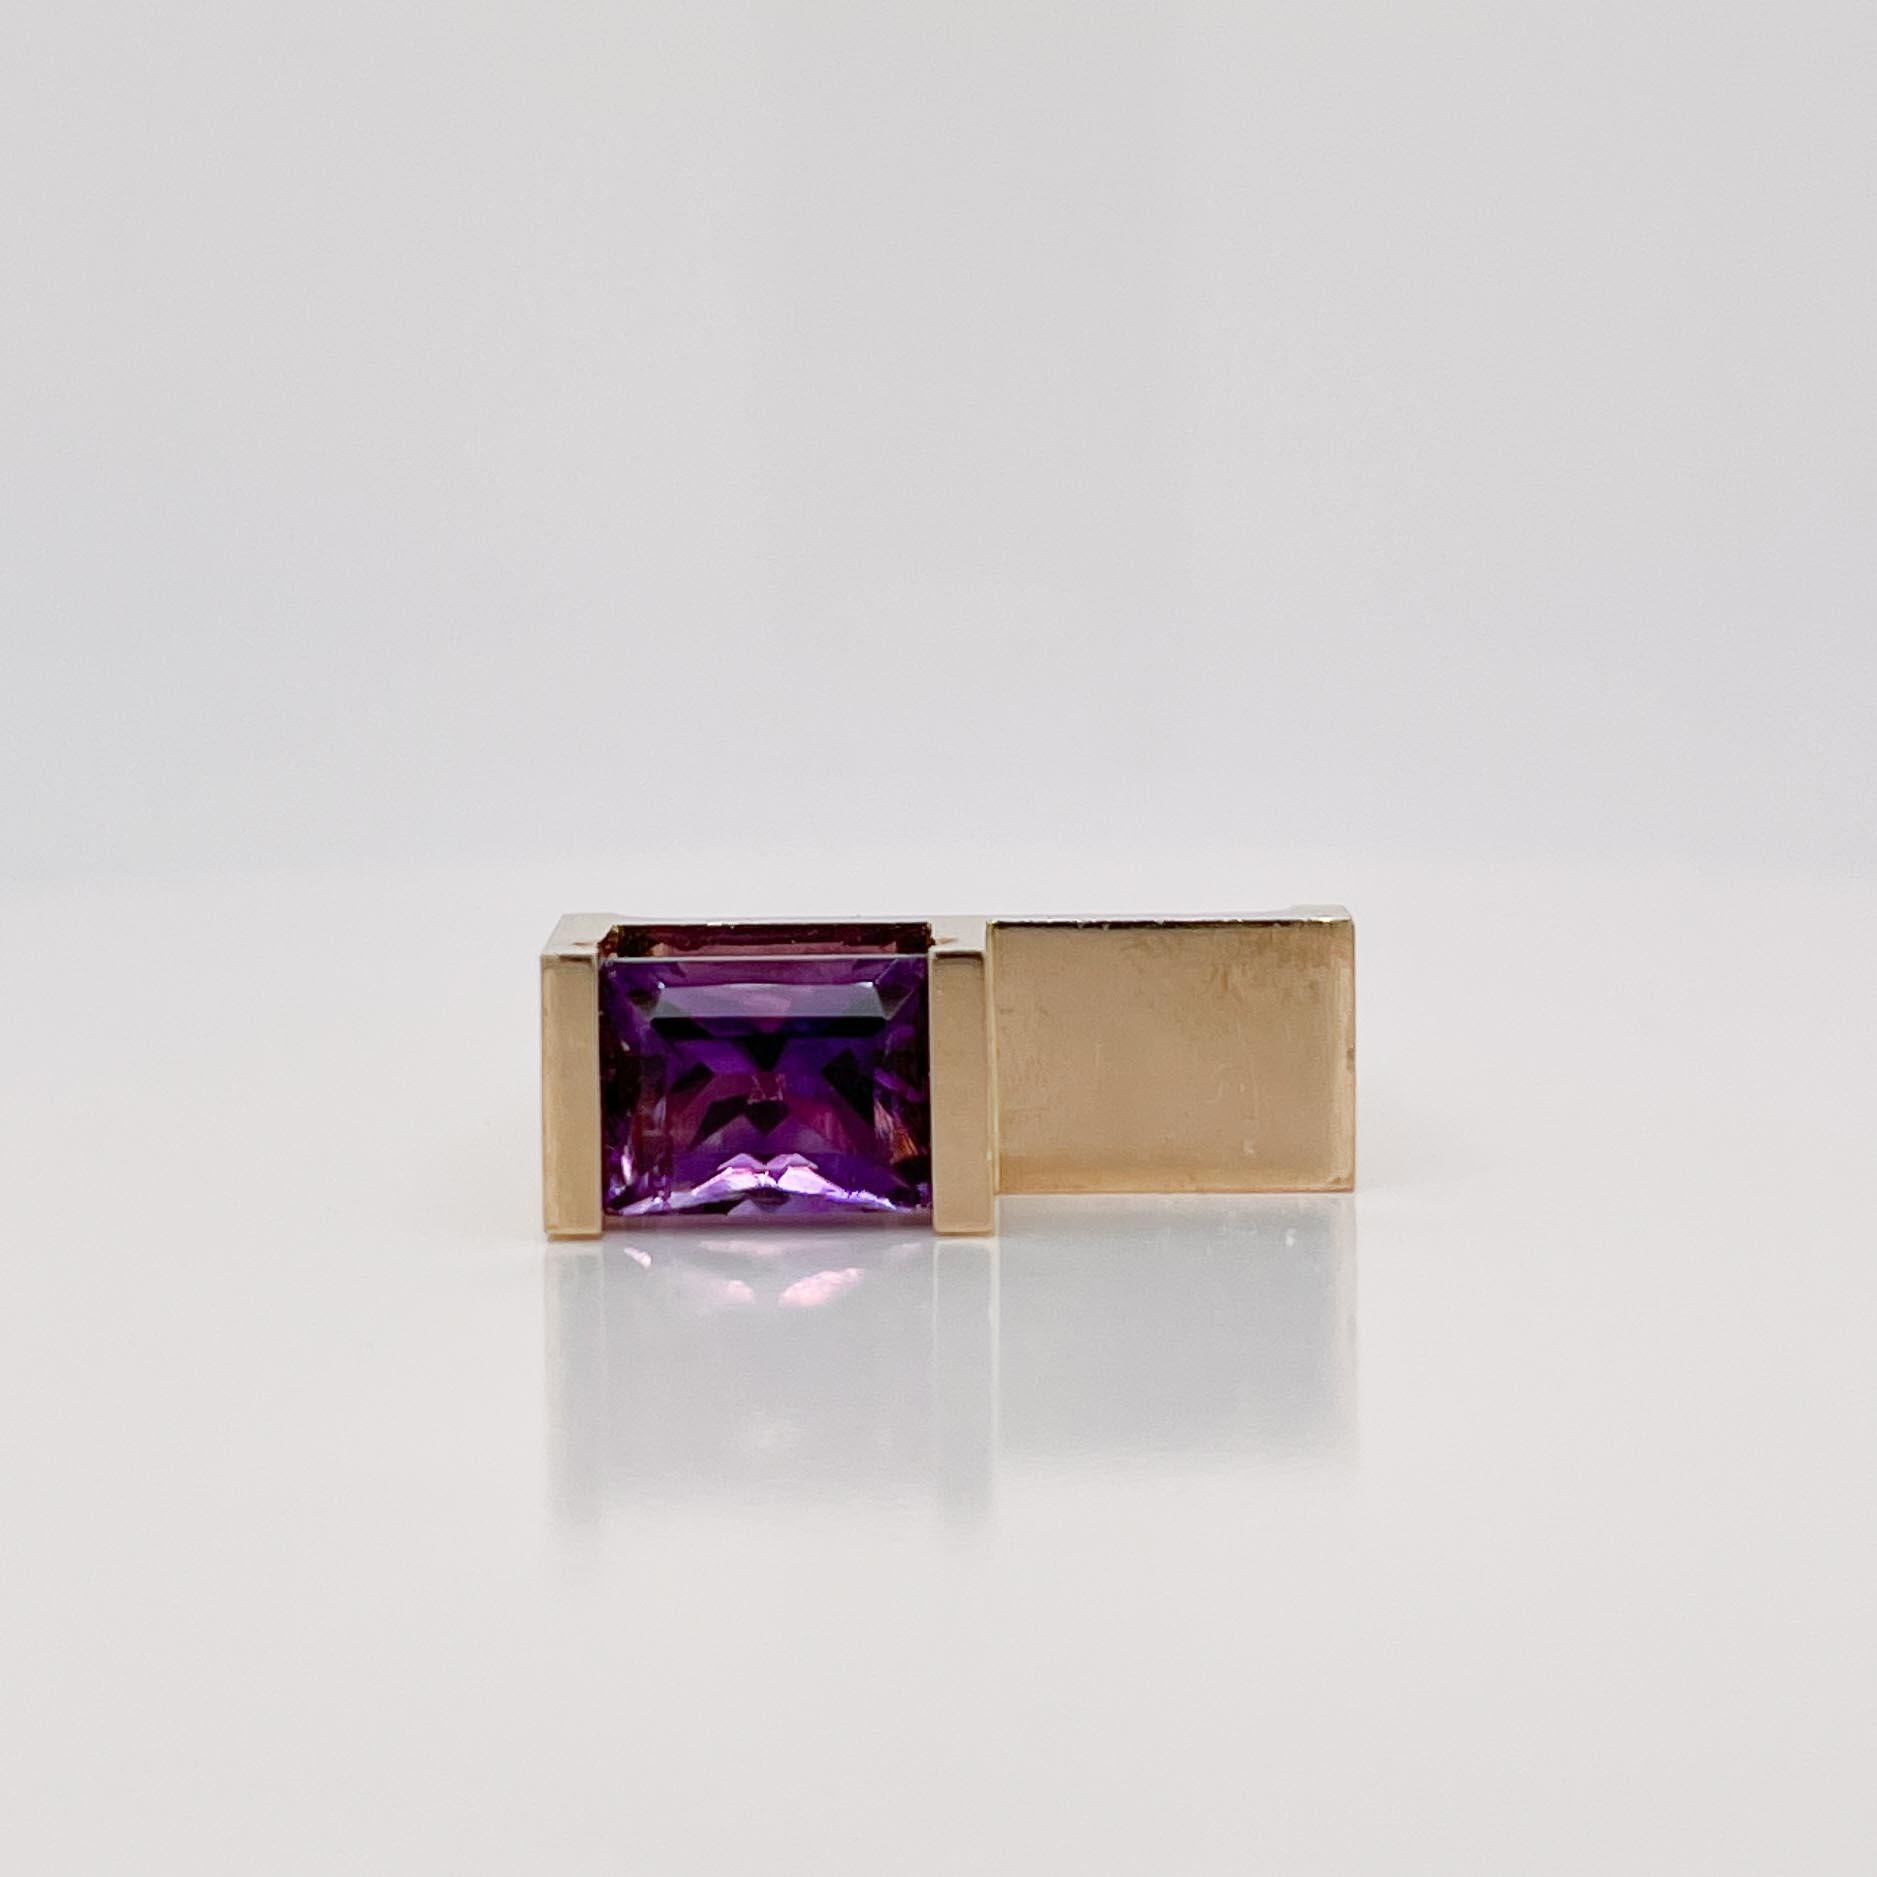 A very fine signed gold and amethyst cocktail ring.

By Trisko. 

In 14k yellow gold and prong set with and emerald cut amethyst gemstone on a square band.

Simply a great architecturally inspired ring by Trisko!

(The final images depict this ring